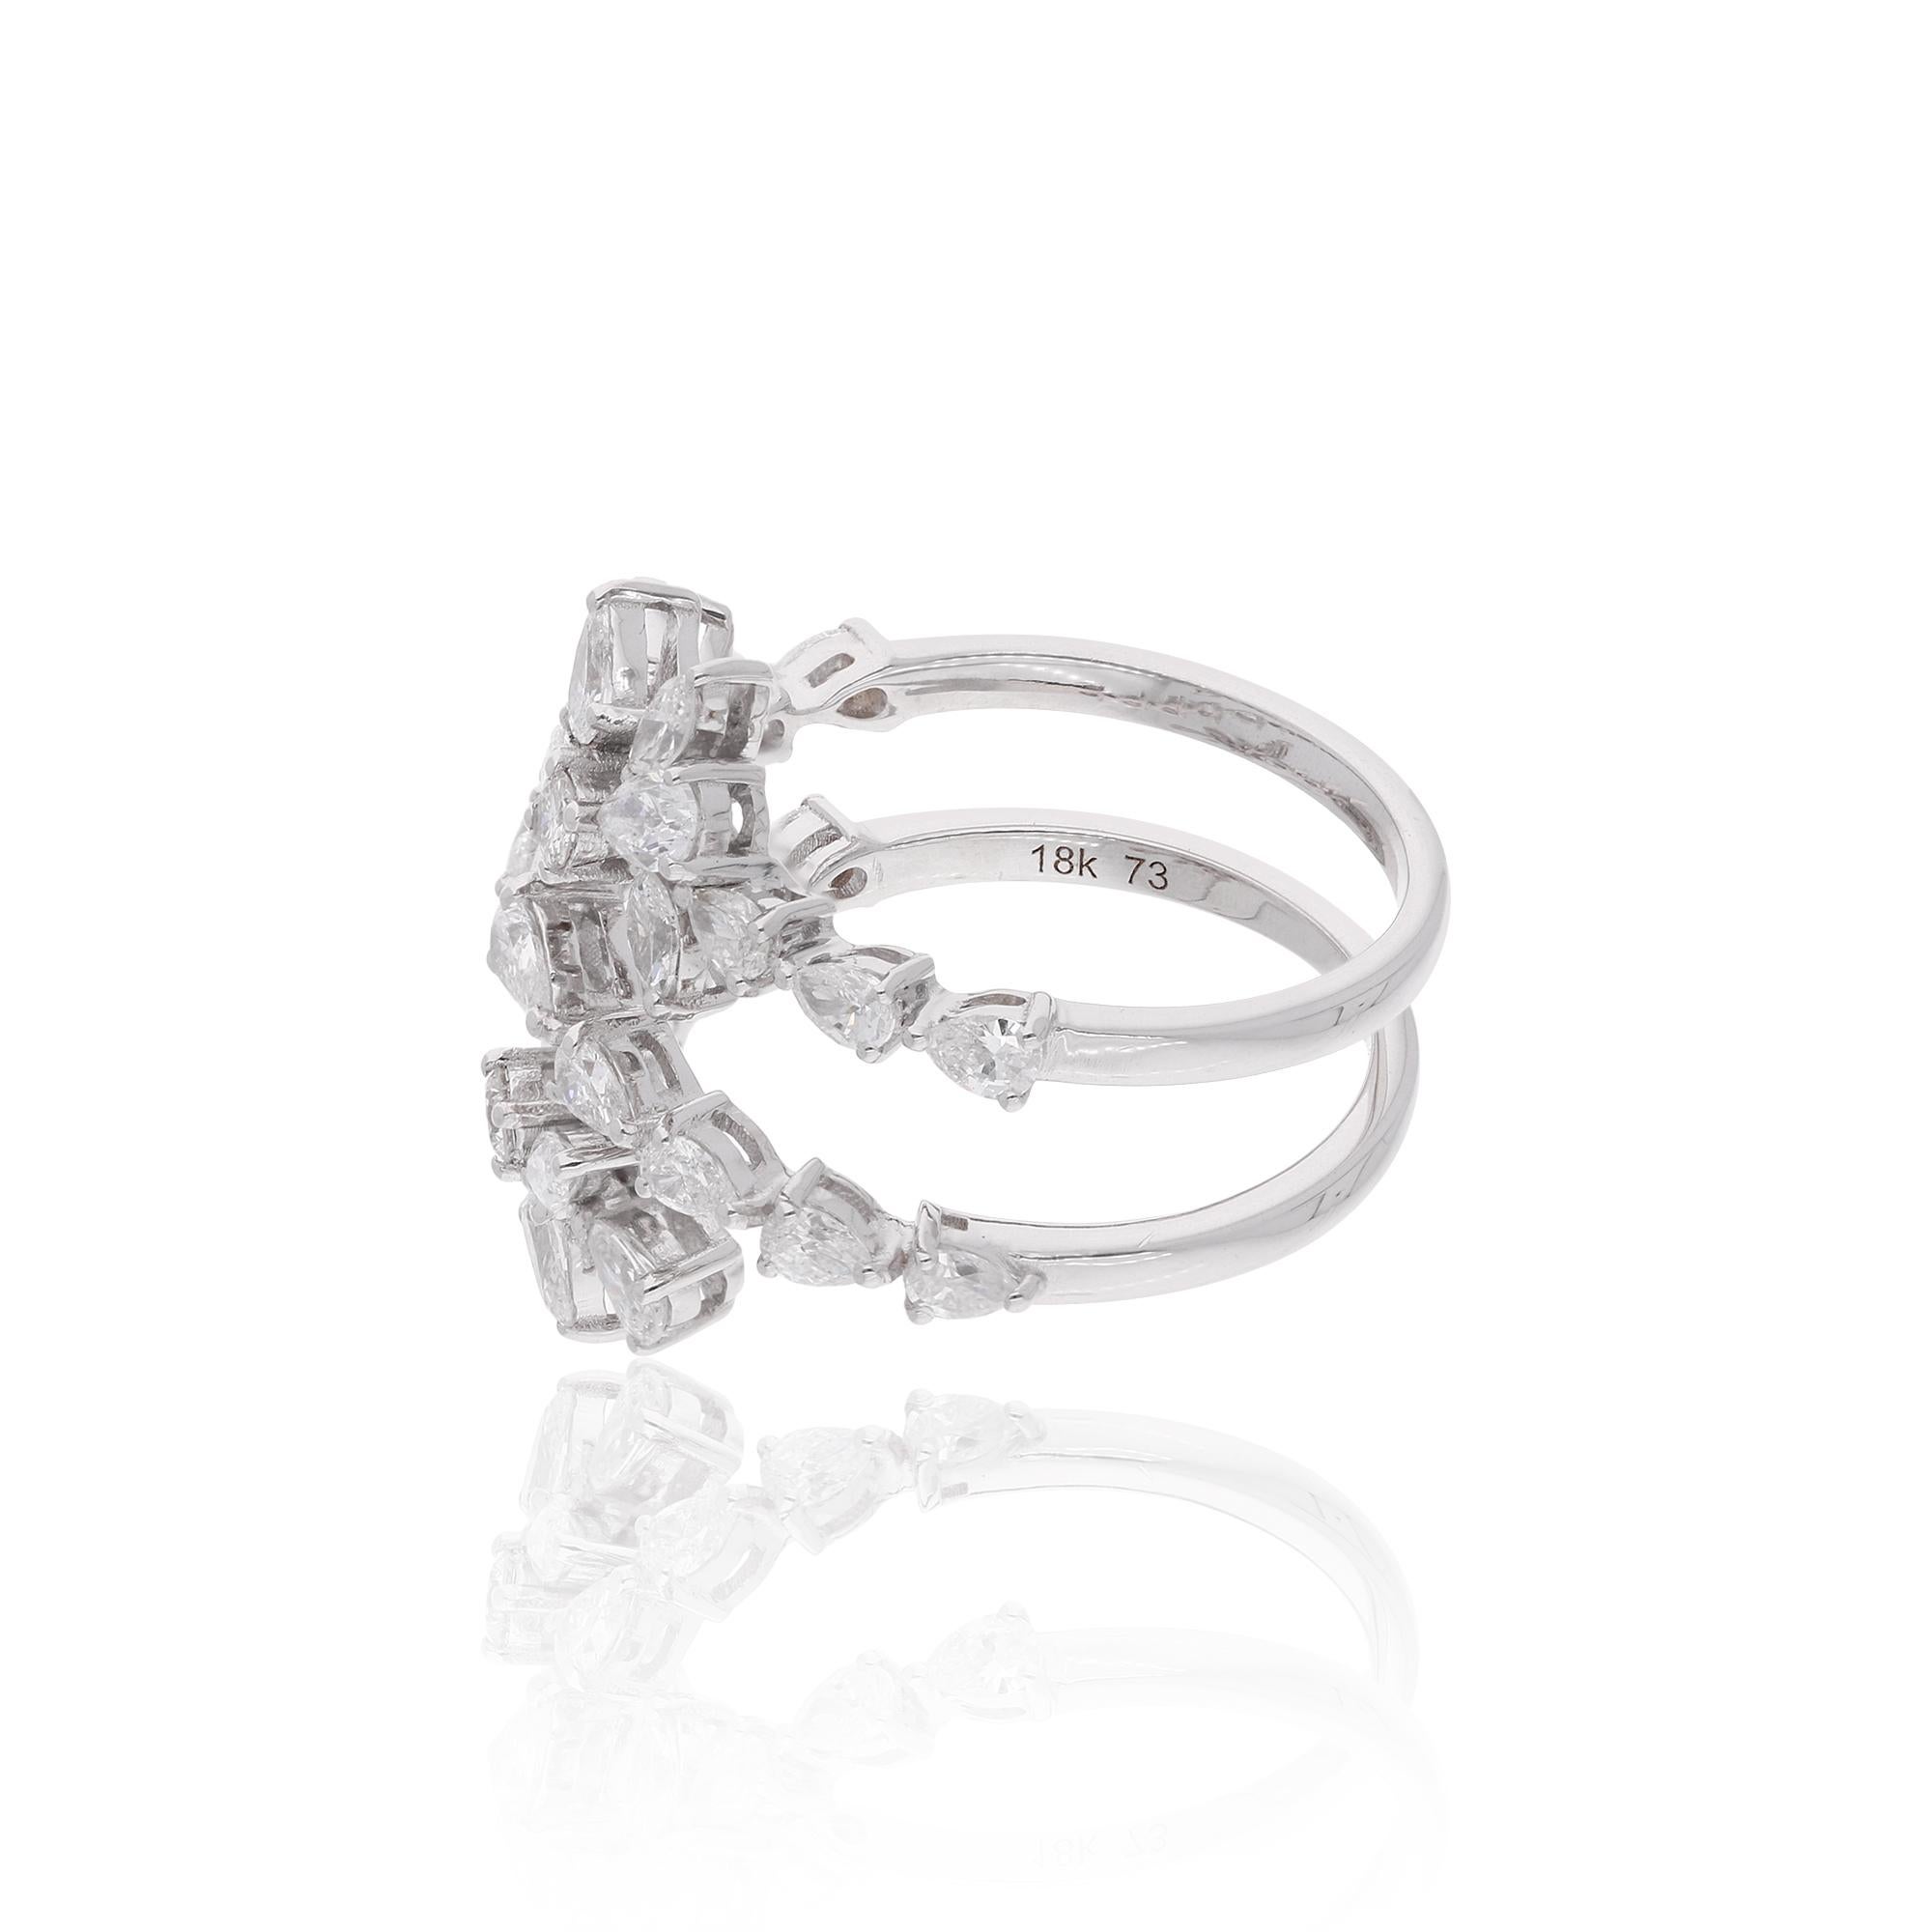 Embrace the eternal beauty and sophistication of this stunning 1.65 Carat Pear Round Marquise Diamond Spring Ring, meticulously crafted in exquisite 14 Karat White Gold. This captivating piece of fine jewelry is a radiant celebration of timeless